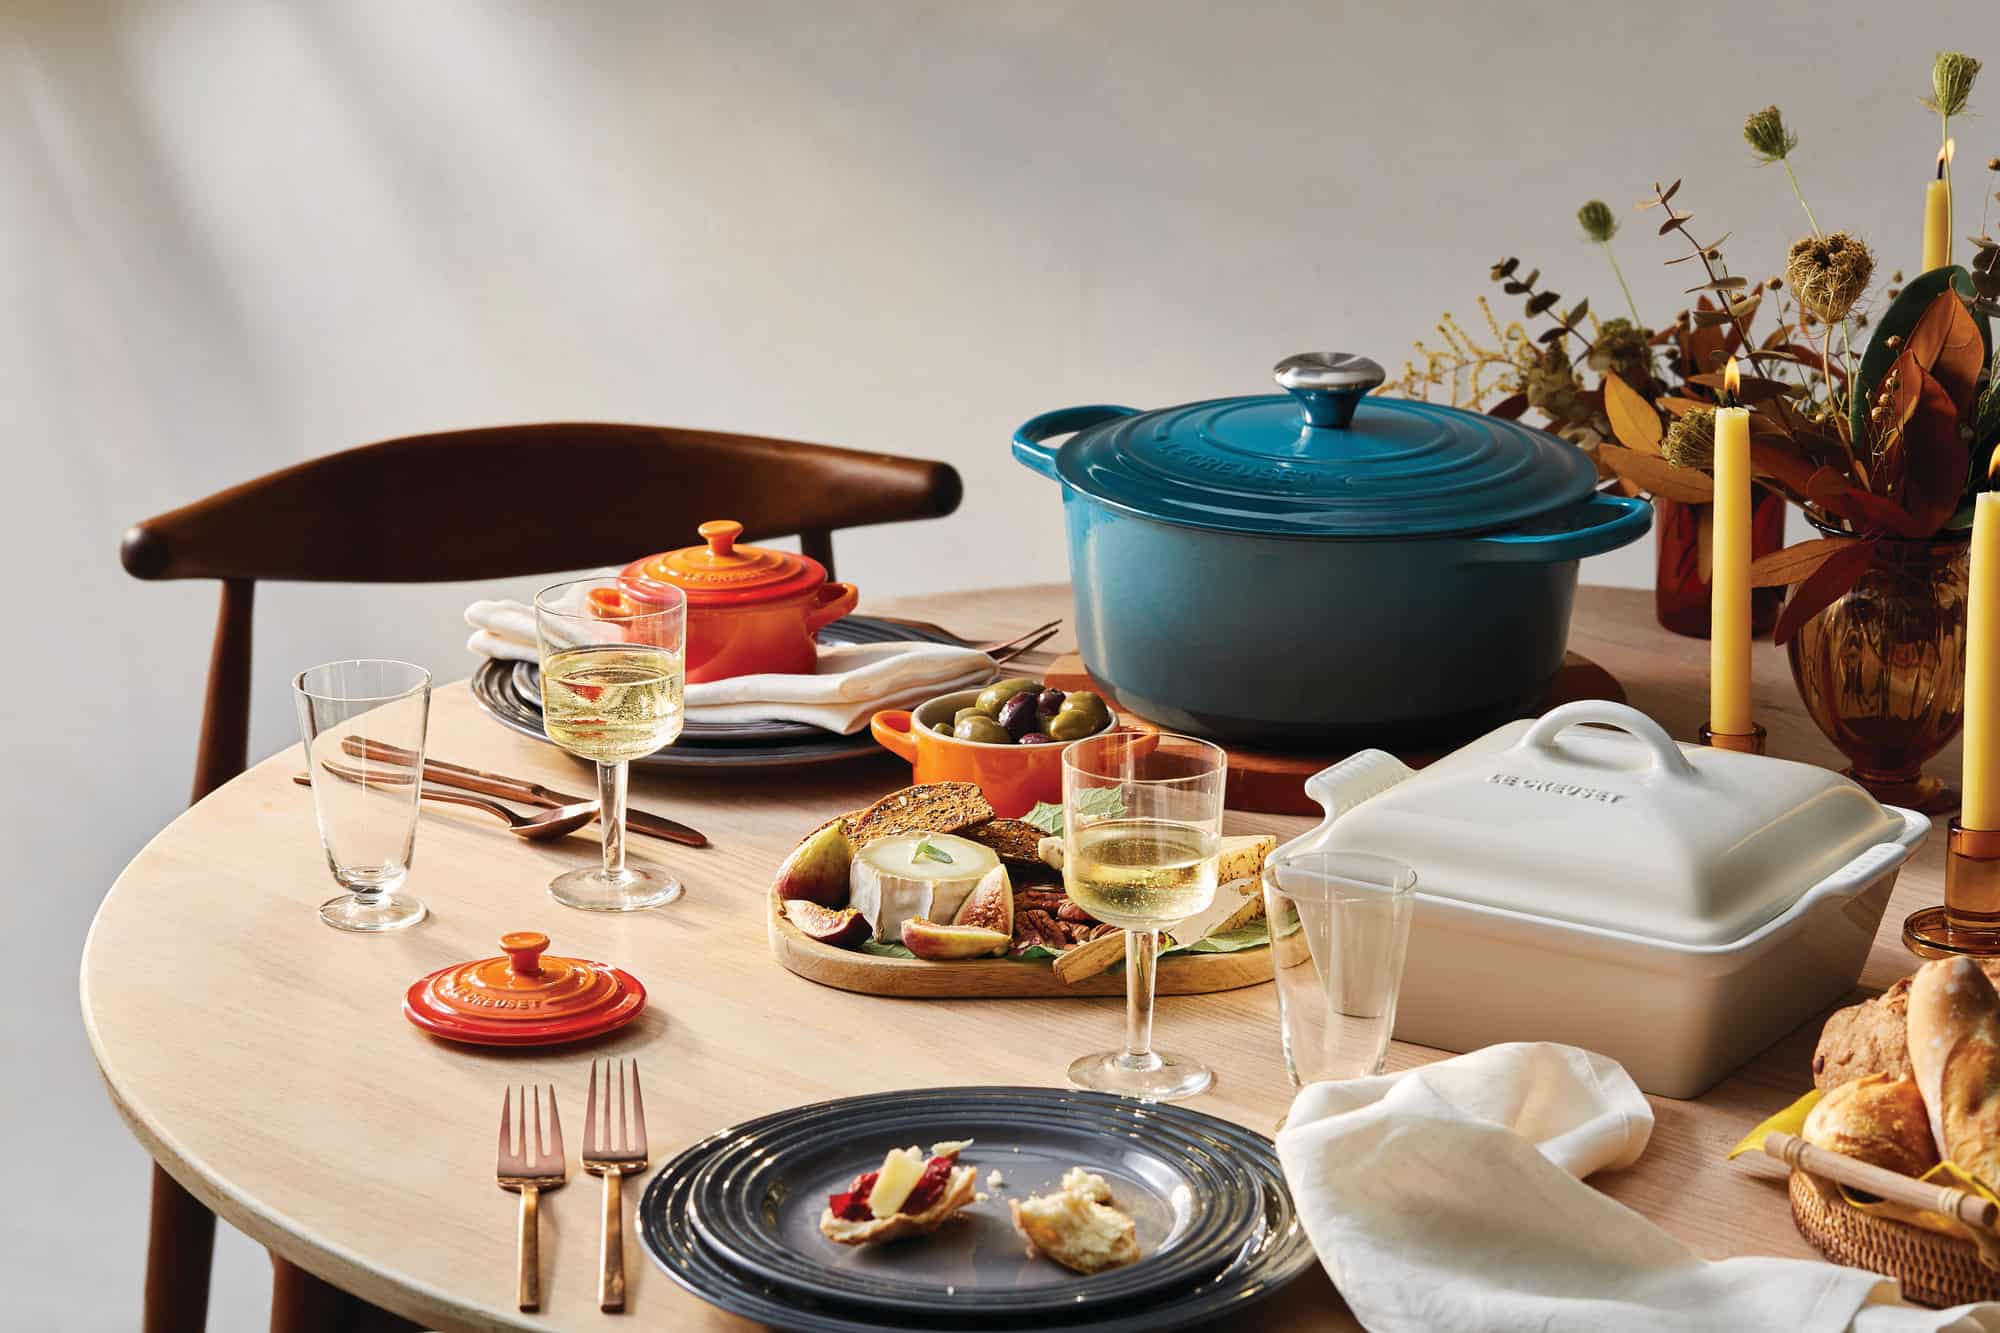 A wooden table with a meal prepared in several Le Creuset pots.